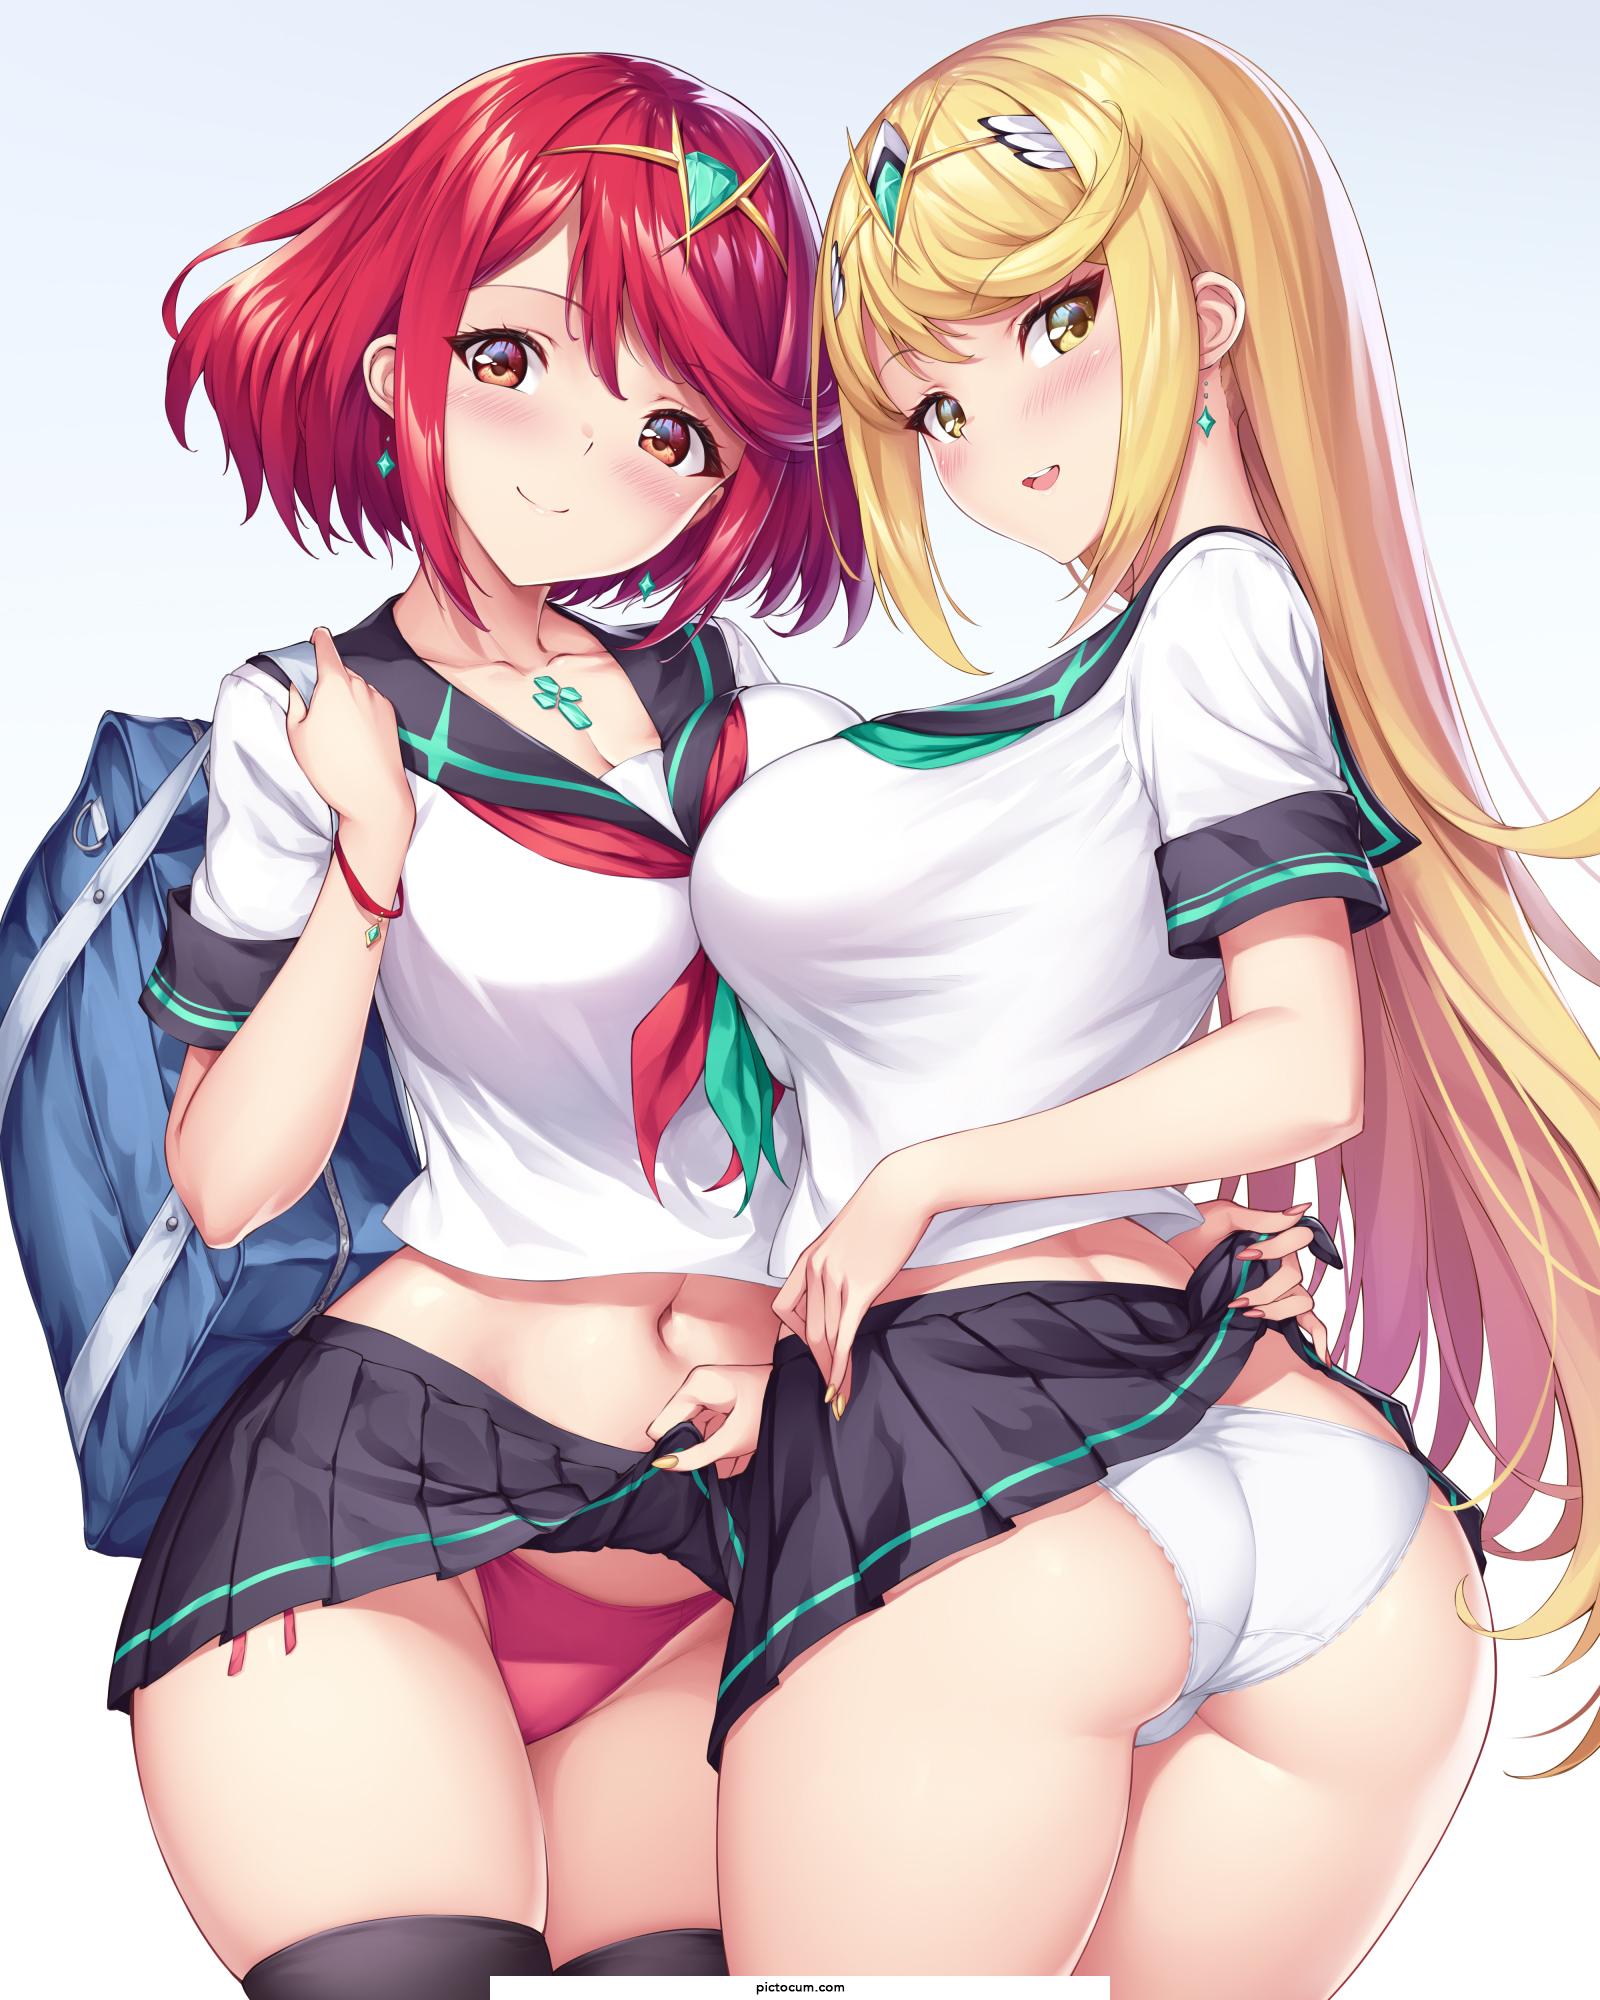 Pyra, And Mythra In Uniform